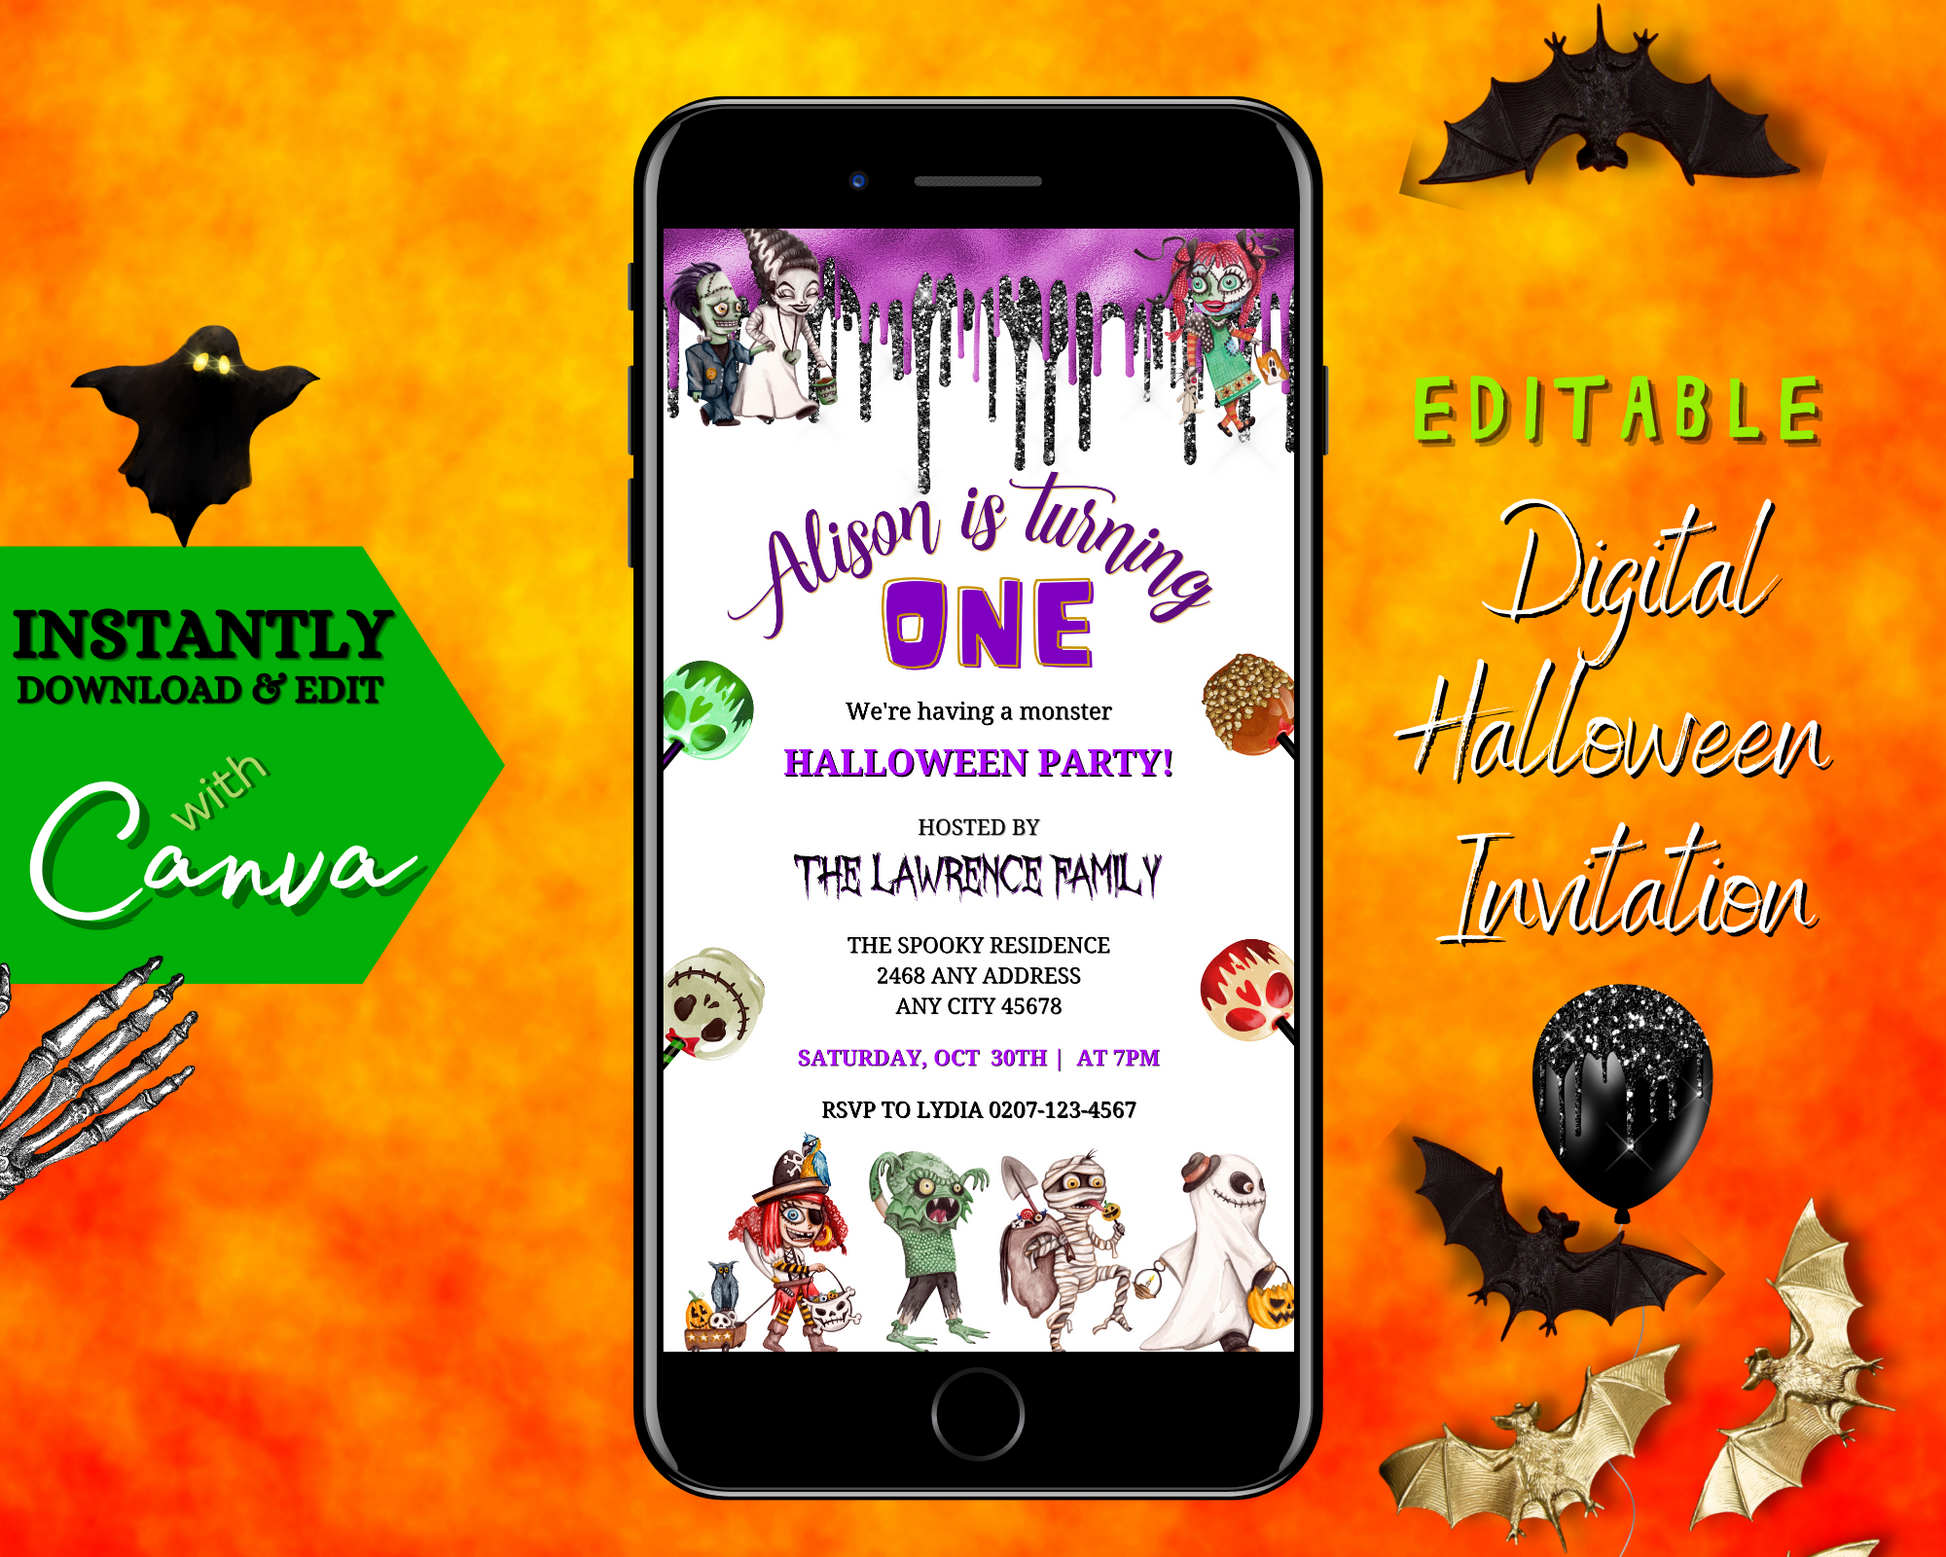 Children's Halloween Party Evite featuring a smartphone displaying a customizable invitation template with monsters and Halloween-themed graphics.